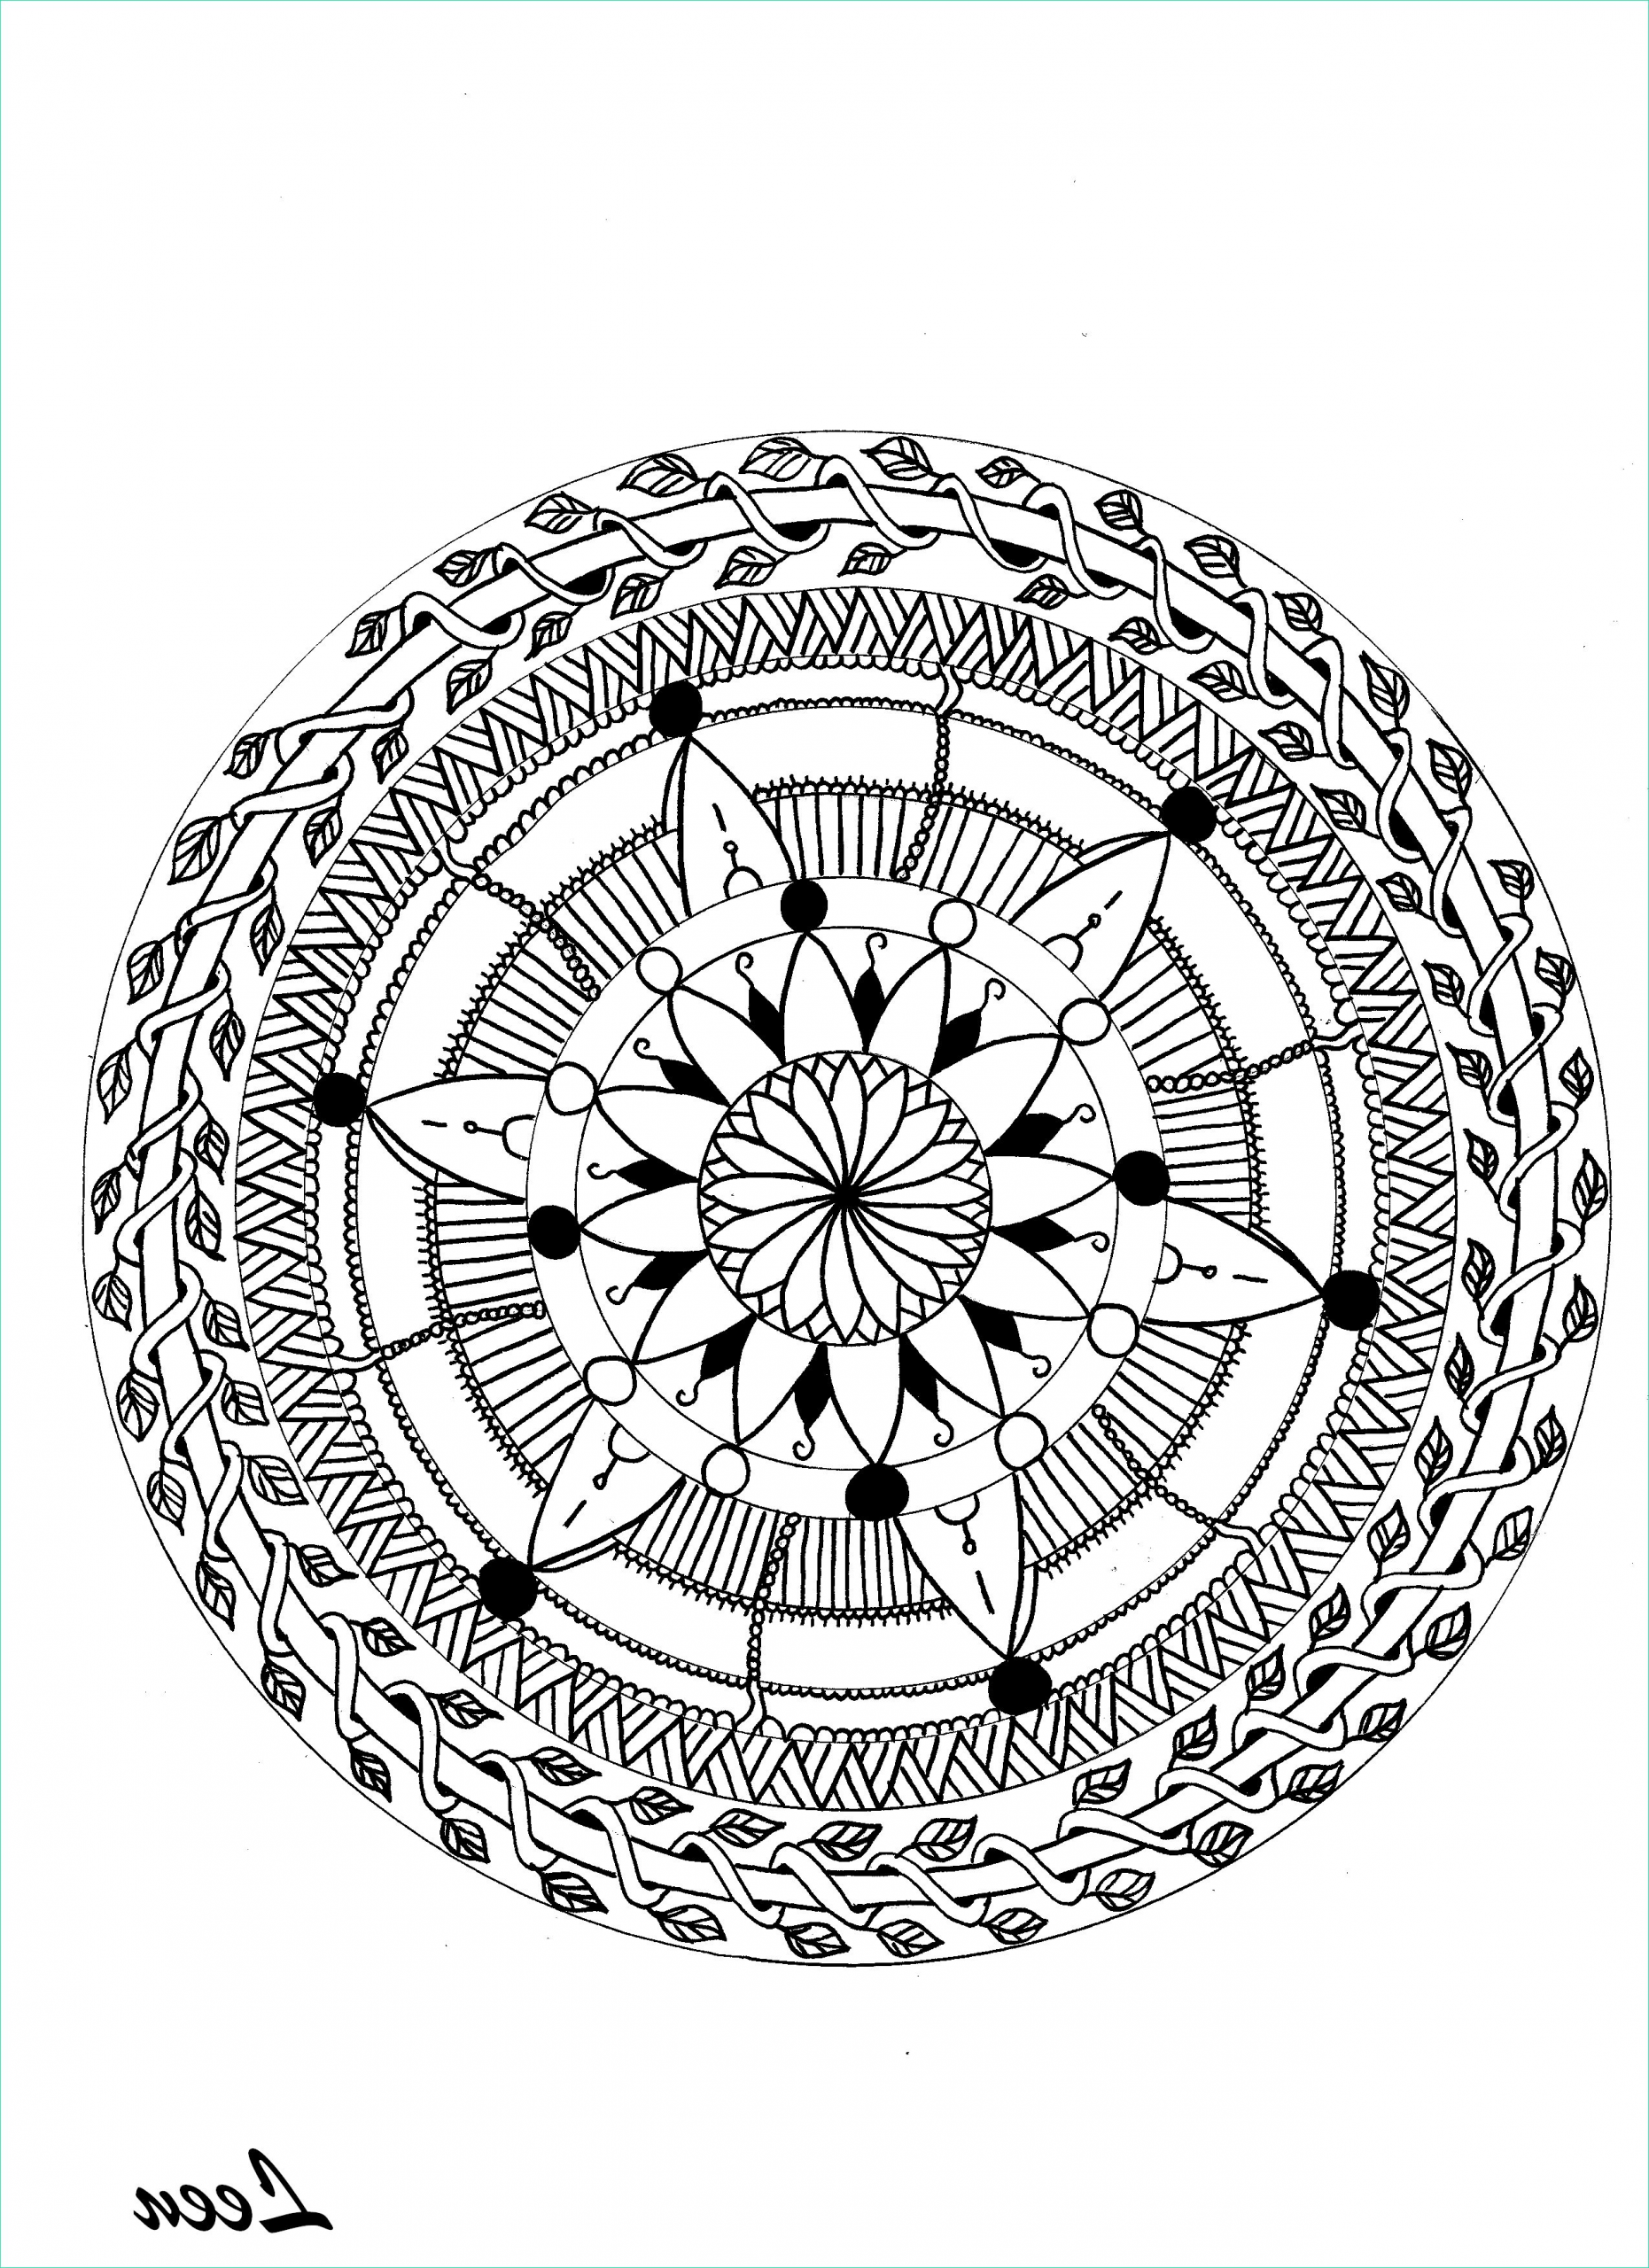 Dessin Mandalas Cool Galerie Mandala with Flowers and Leaves Difficult Mandalas for